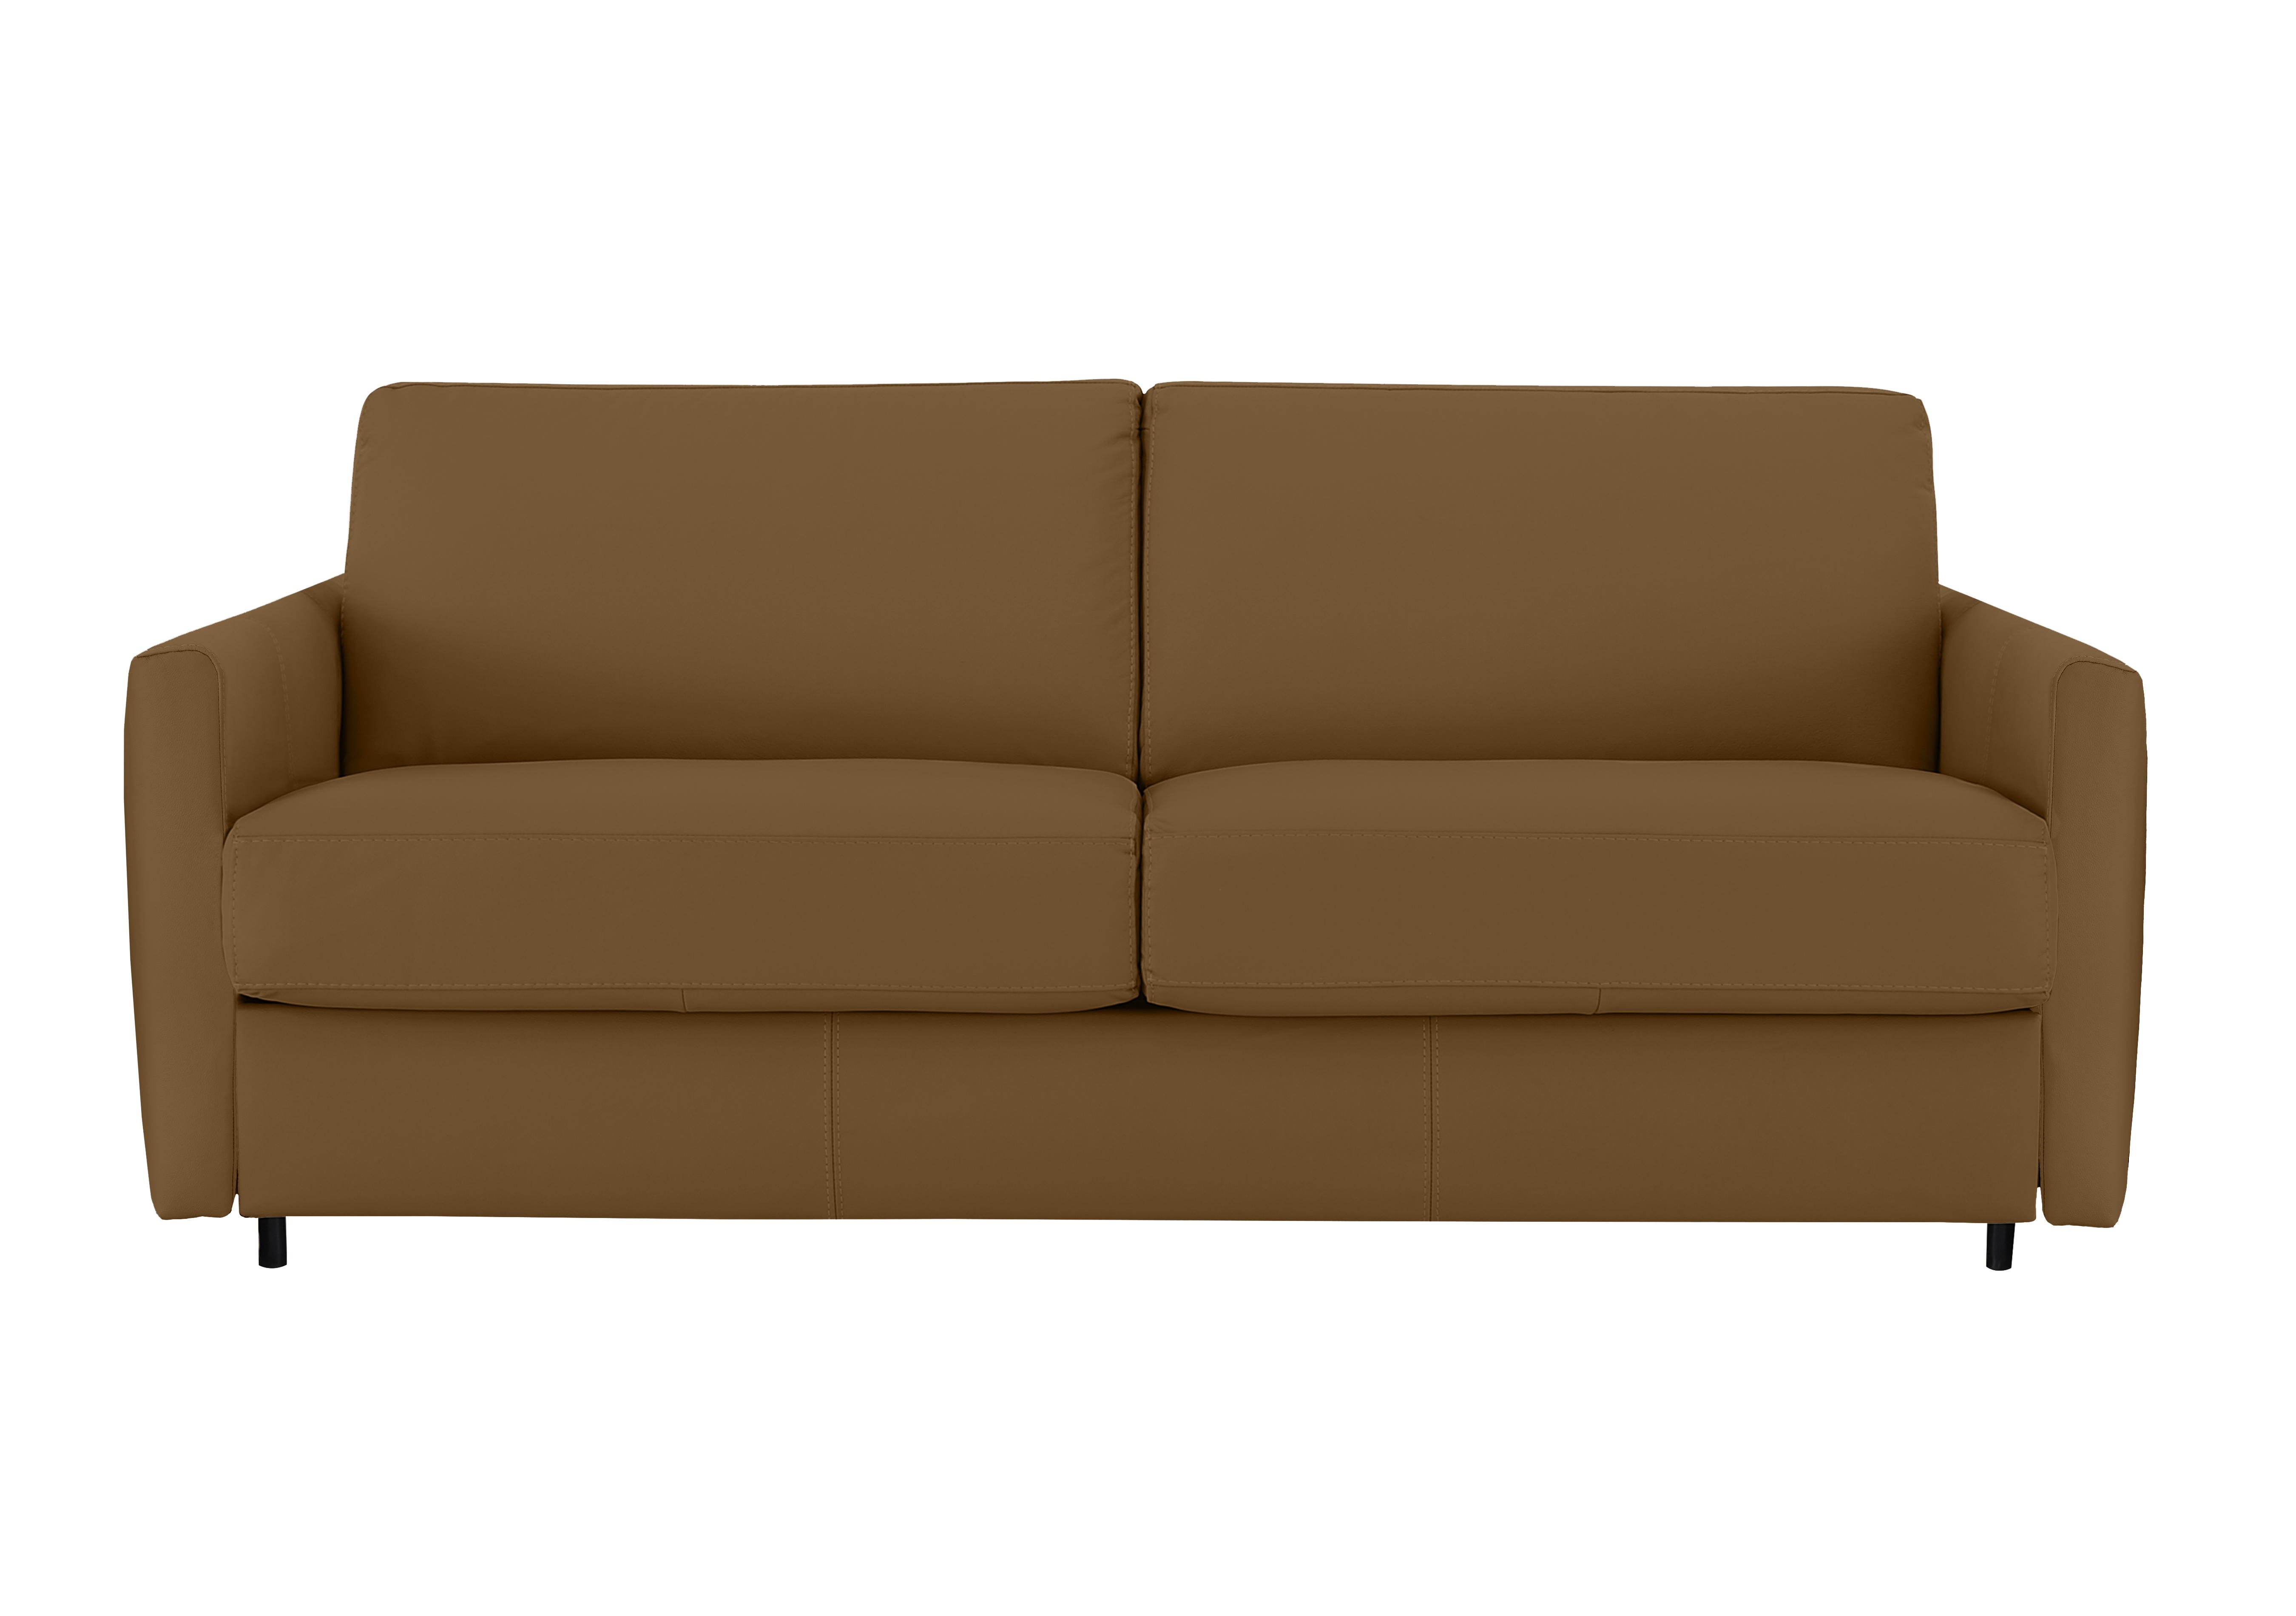 Alcova 3 Seater Leather Sofa Bed with Slim Arms in Botero Cuoio 2151 on Furniture Village